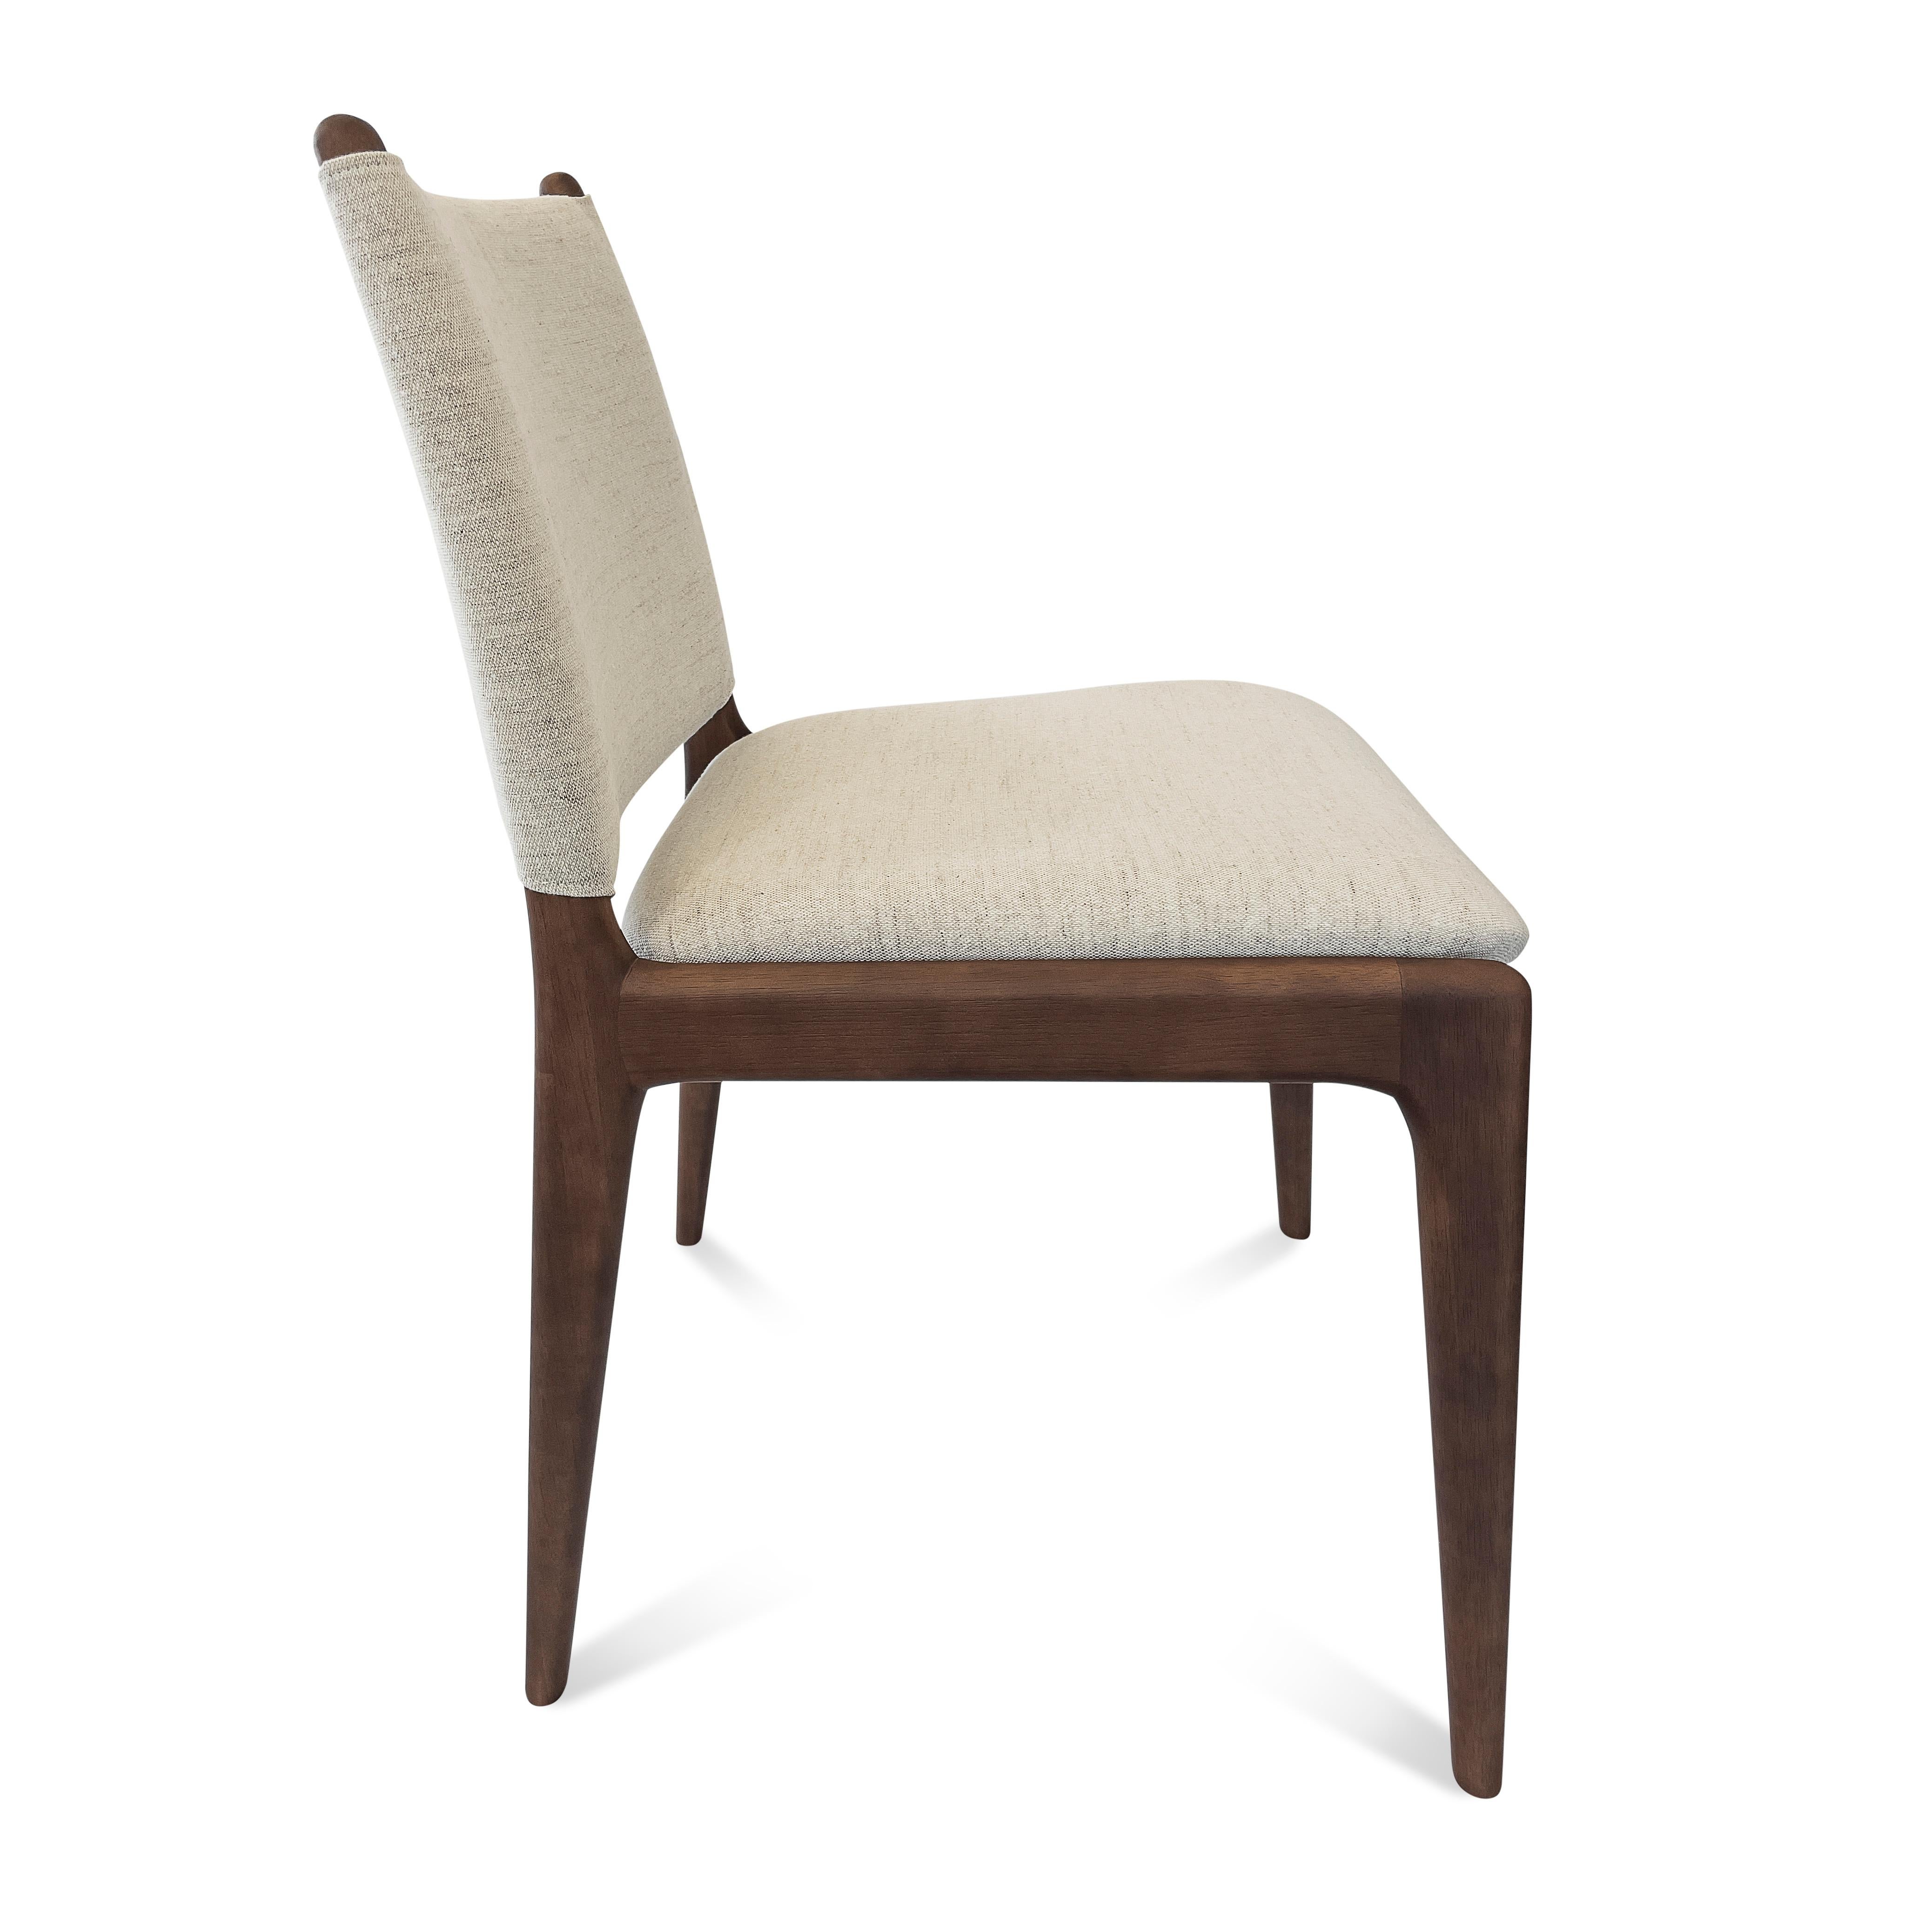 Contemporary Cappio Dining Chair in Walnut Wood Finish with Light Beige Fabric, set of 2 For Sale